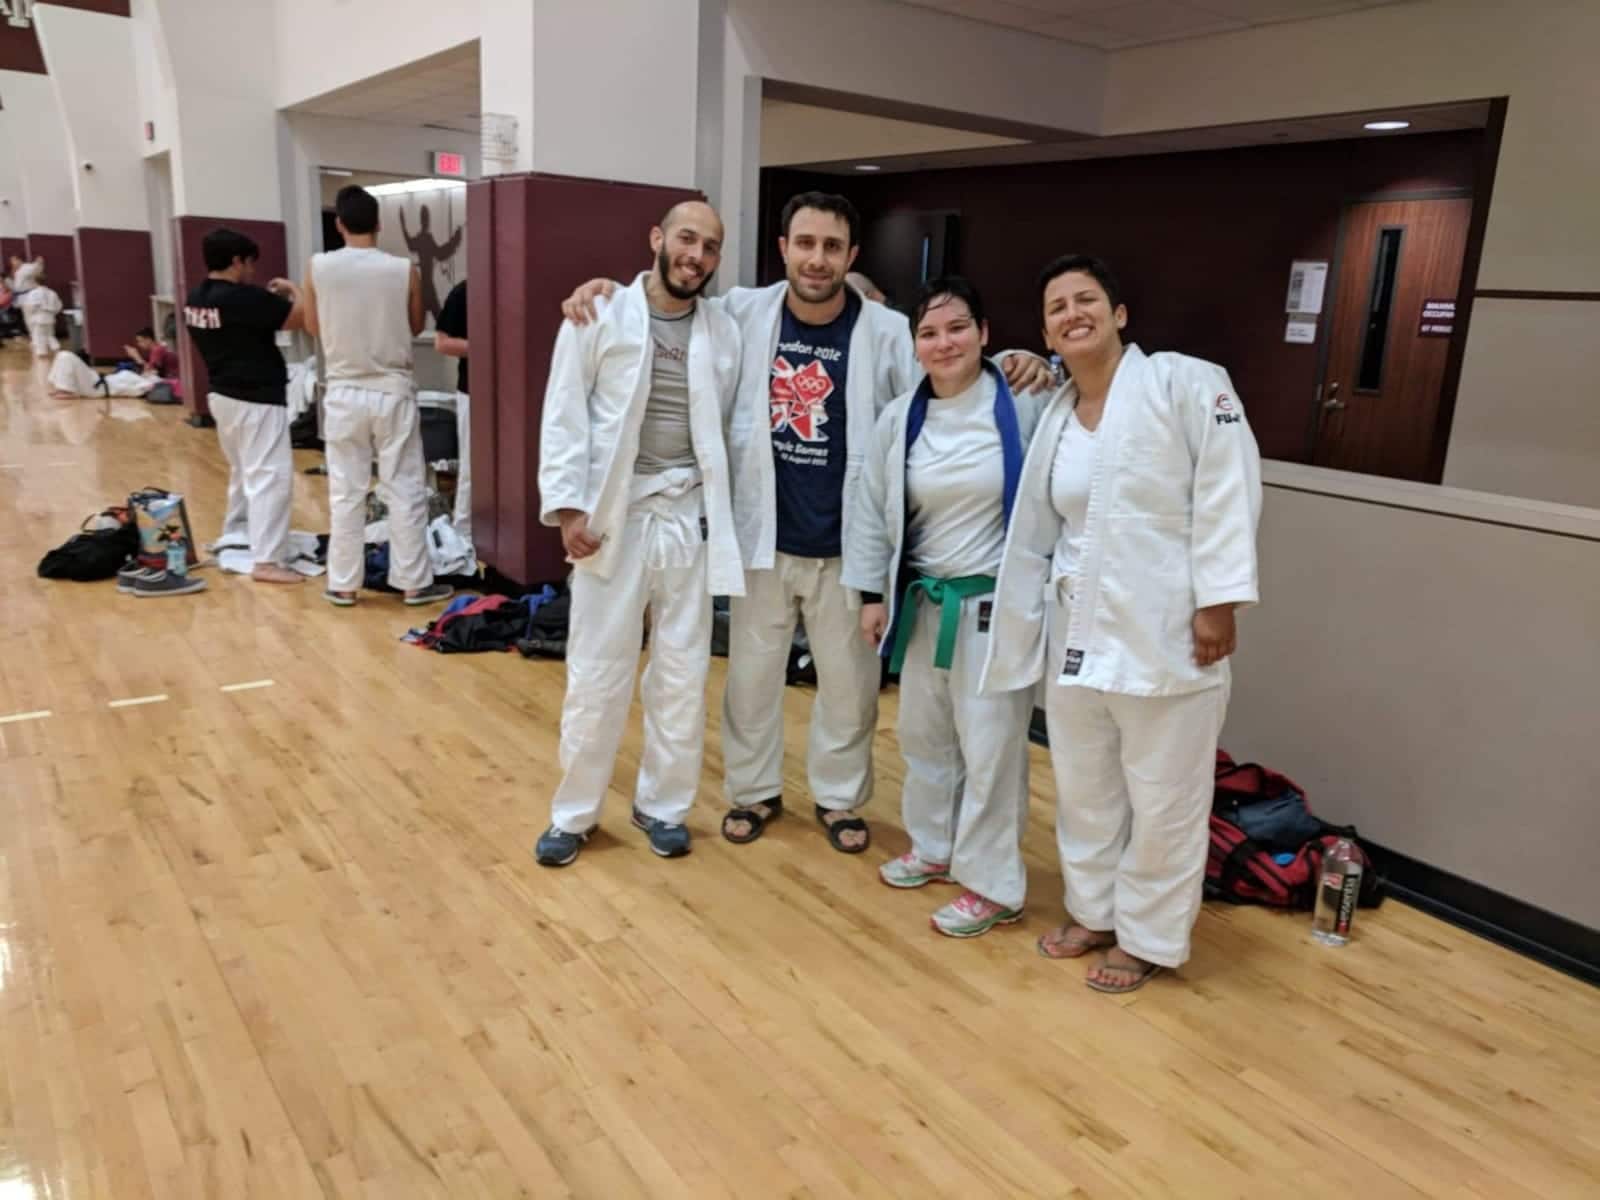 judo athletes pose for a picture after competition